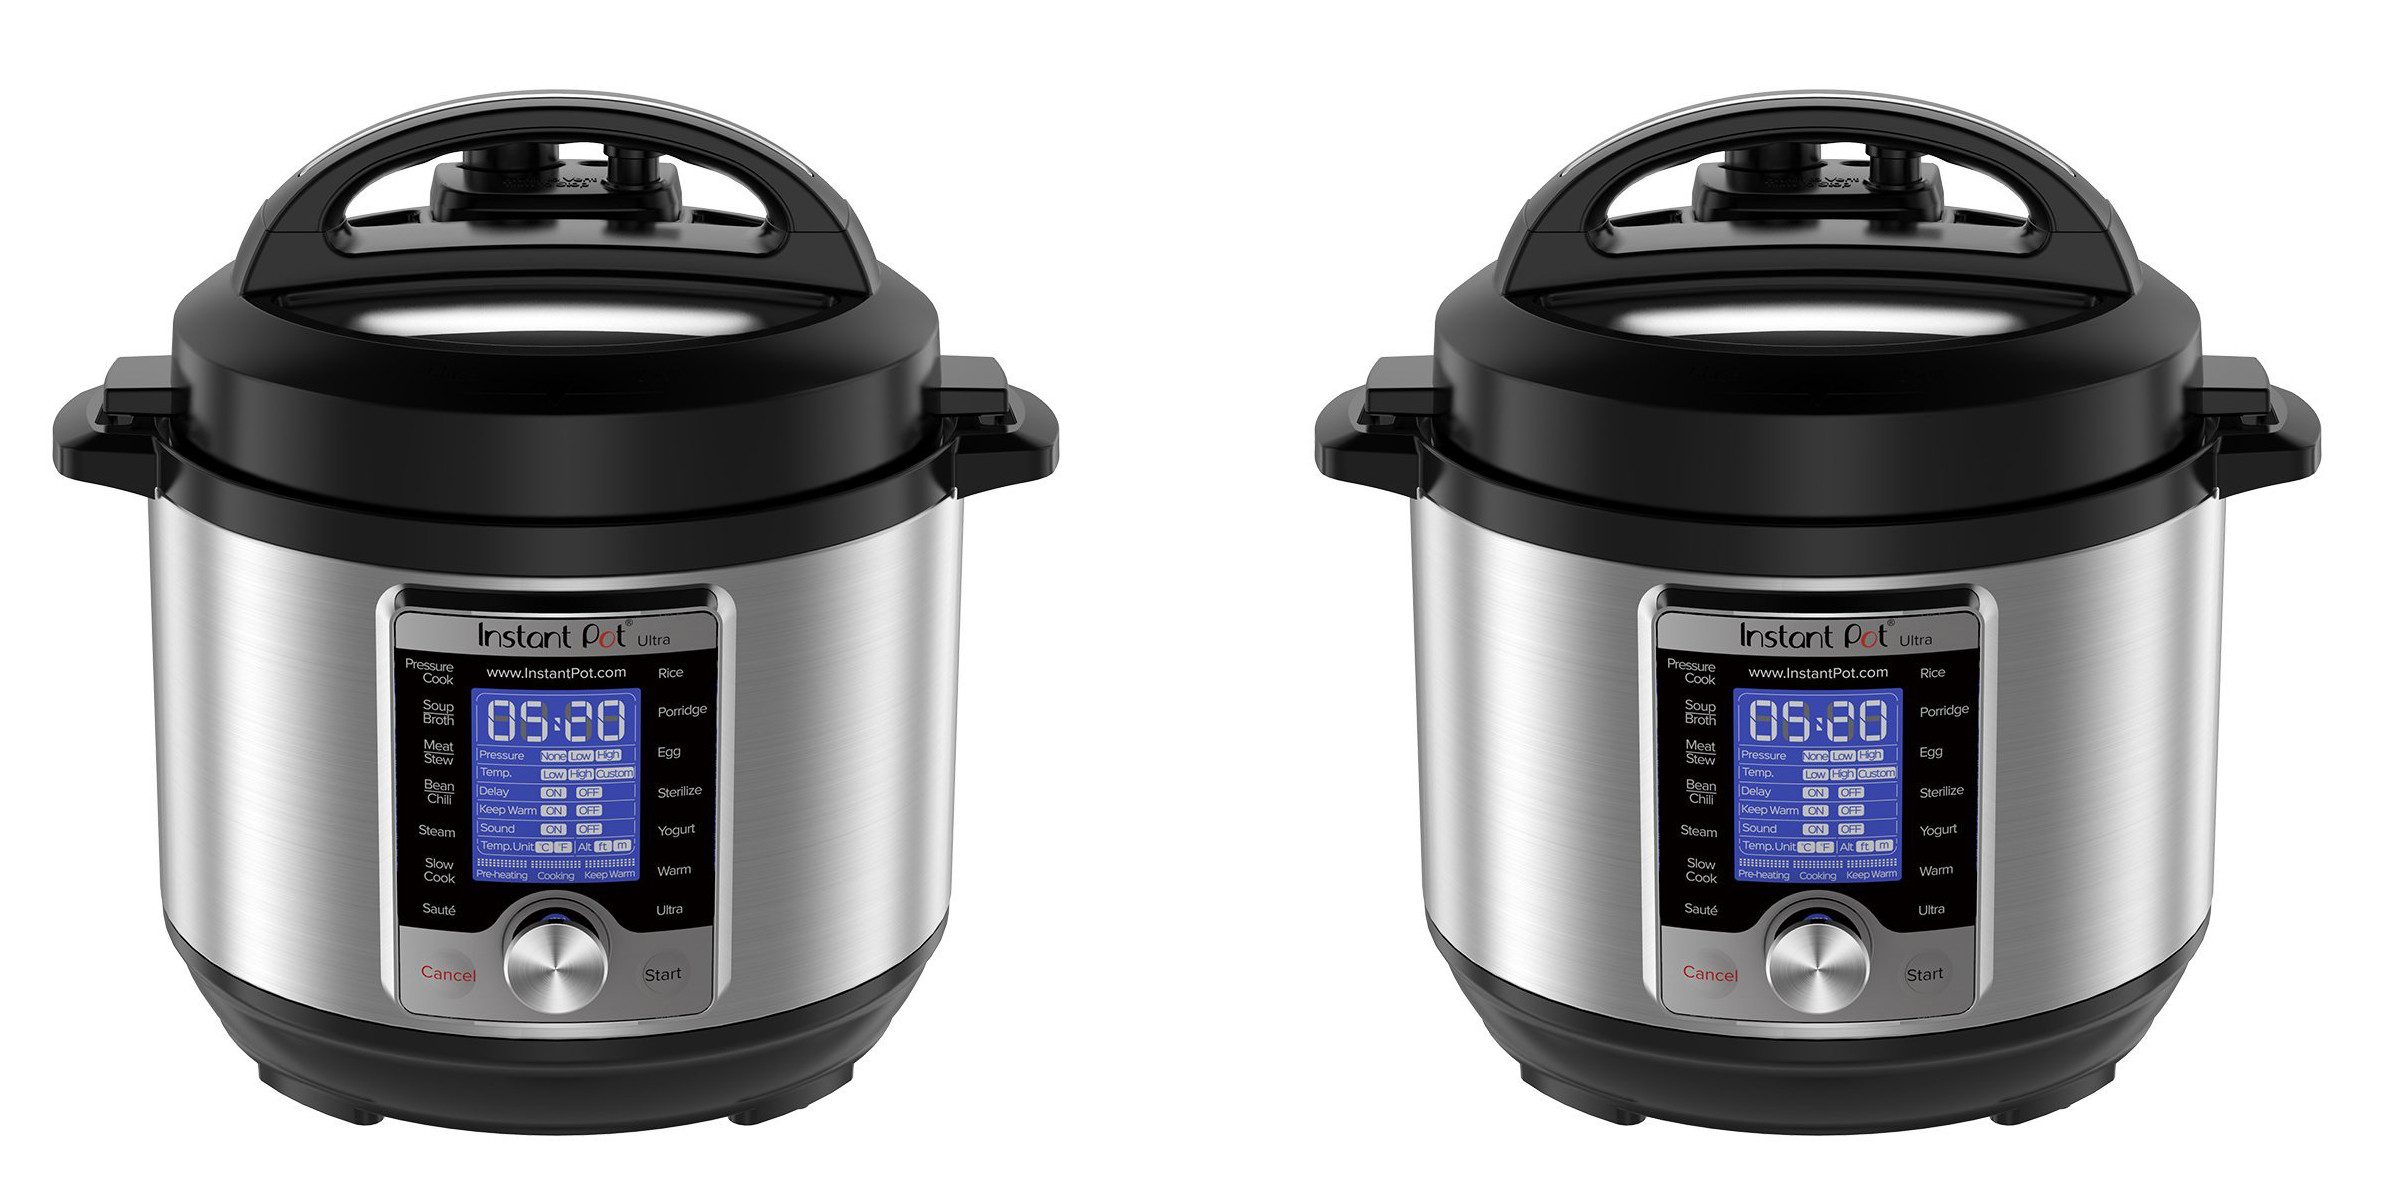 https://9to5toys.com/wp-content/uploads/sites/5/2018/06/instant-pot-ultra-3-qt-10-in-1-multi-use-programmable-pressure-cooker.jpg